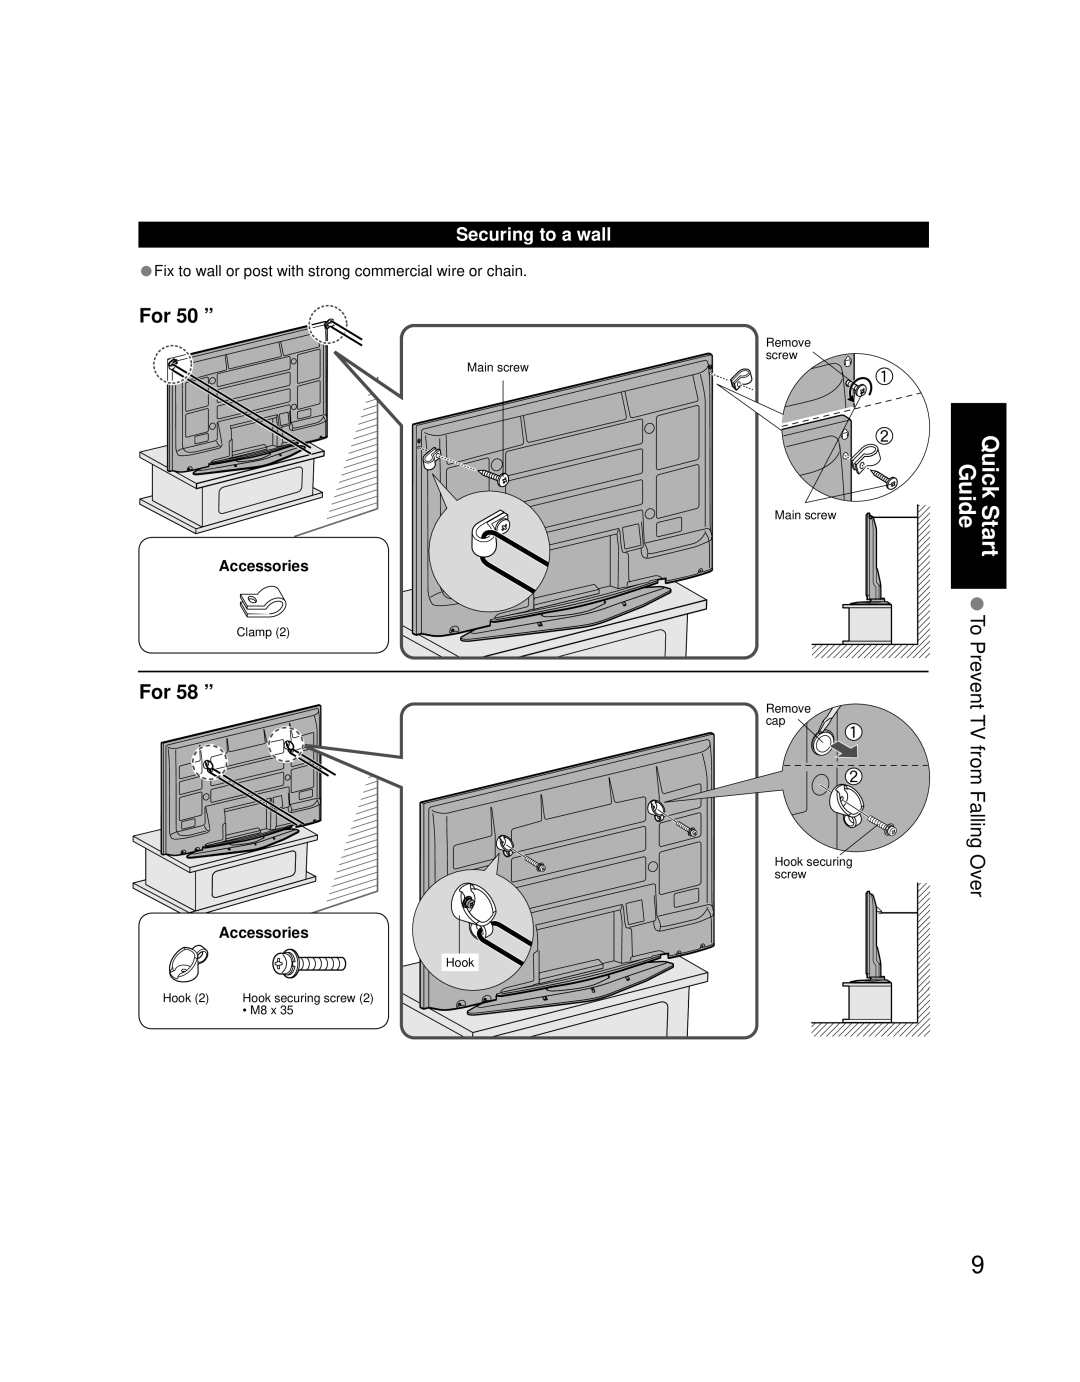 Panasonic TH 50PZ700U Guide To Prevent TV from Falling Over, Securing to a wall, For 50 ”, For 58 ”, Accessories 